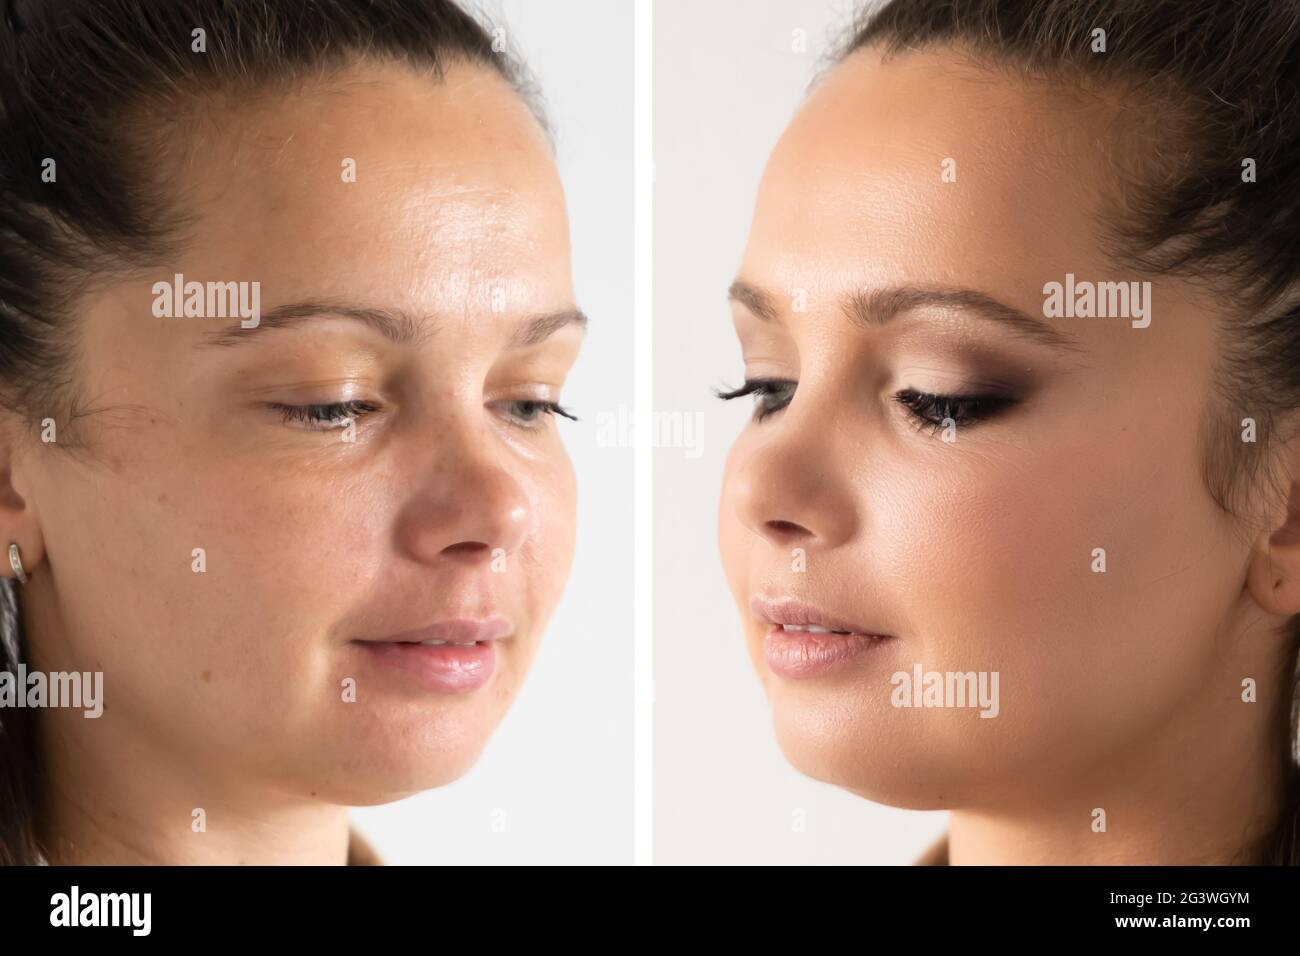 Woman Face Skin Make Up. Comparing Before And After Stock Photo